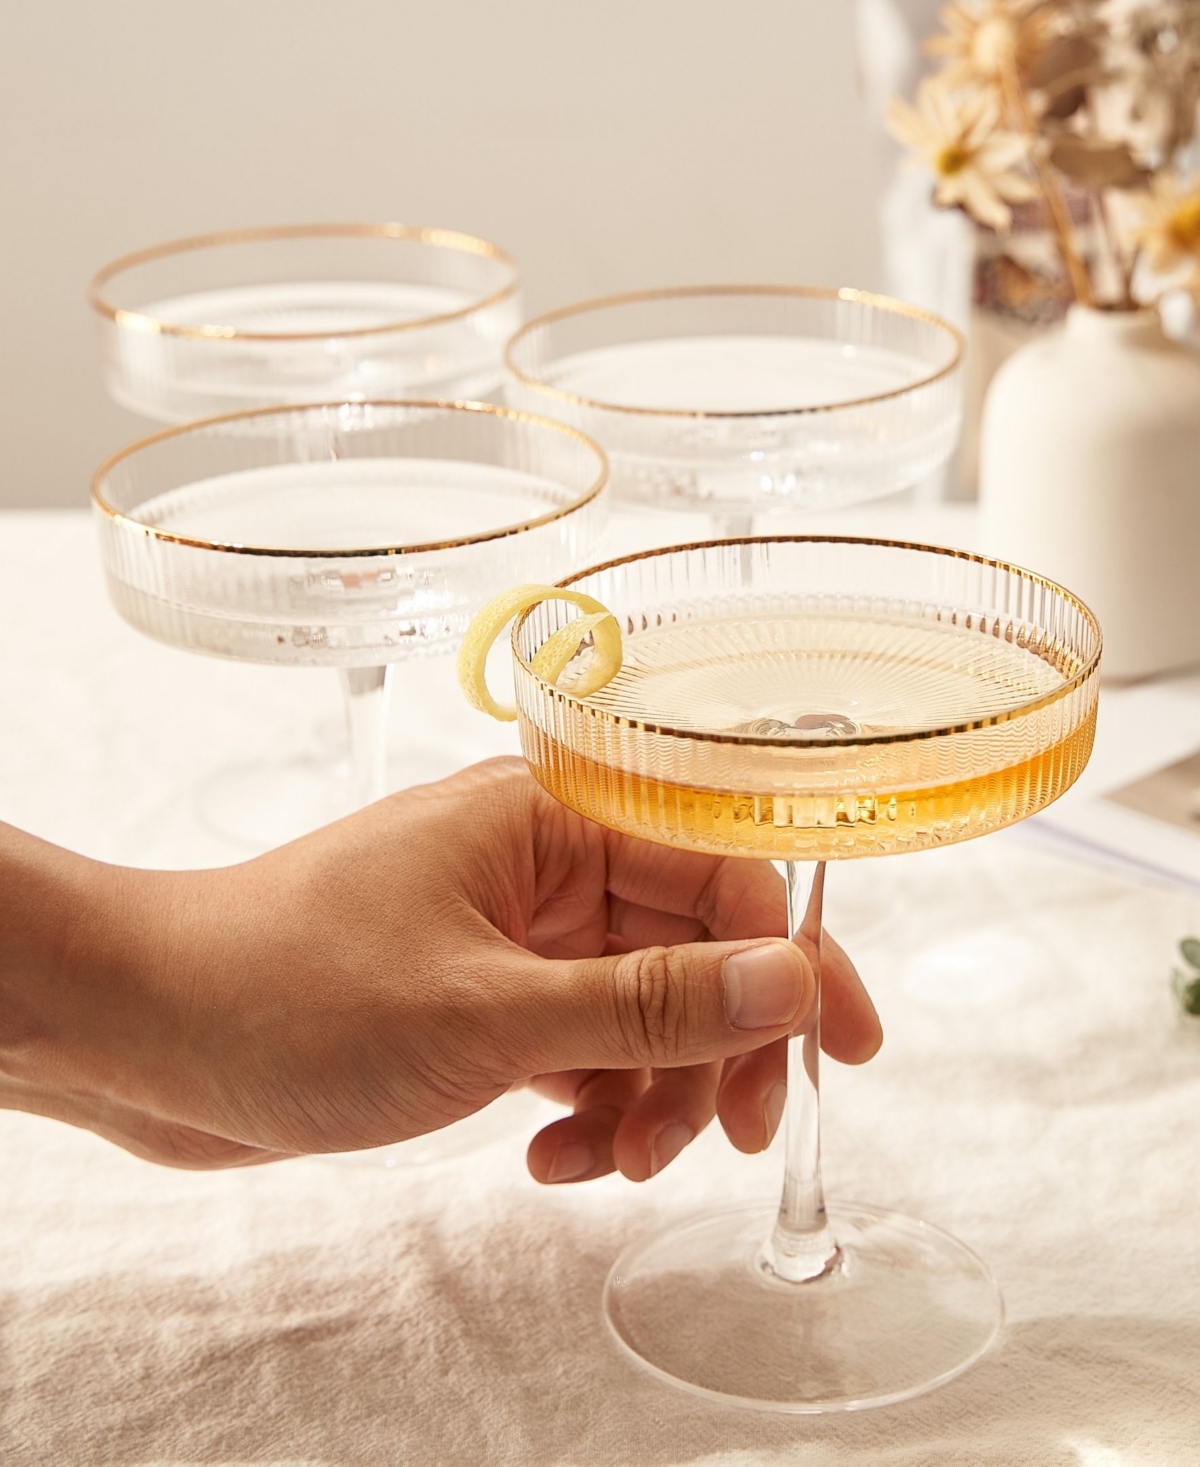 Shop The Wine Savant Ribbed Art Deco Gilded Crystal Coupe Glasses, Set Of 4 In Clear,gold